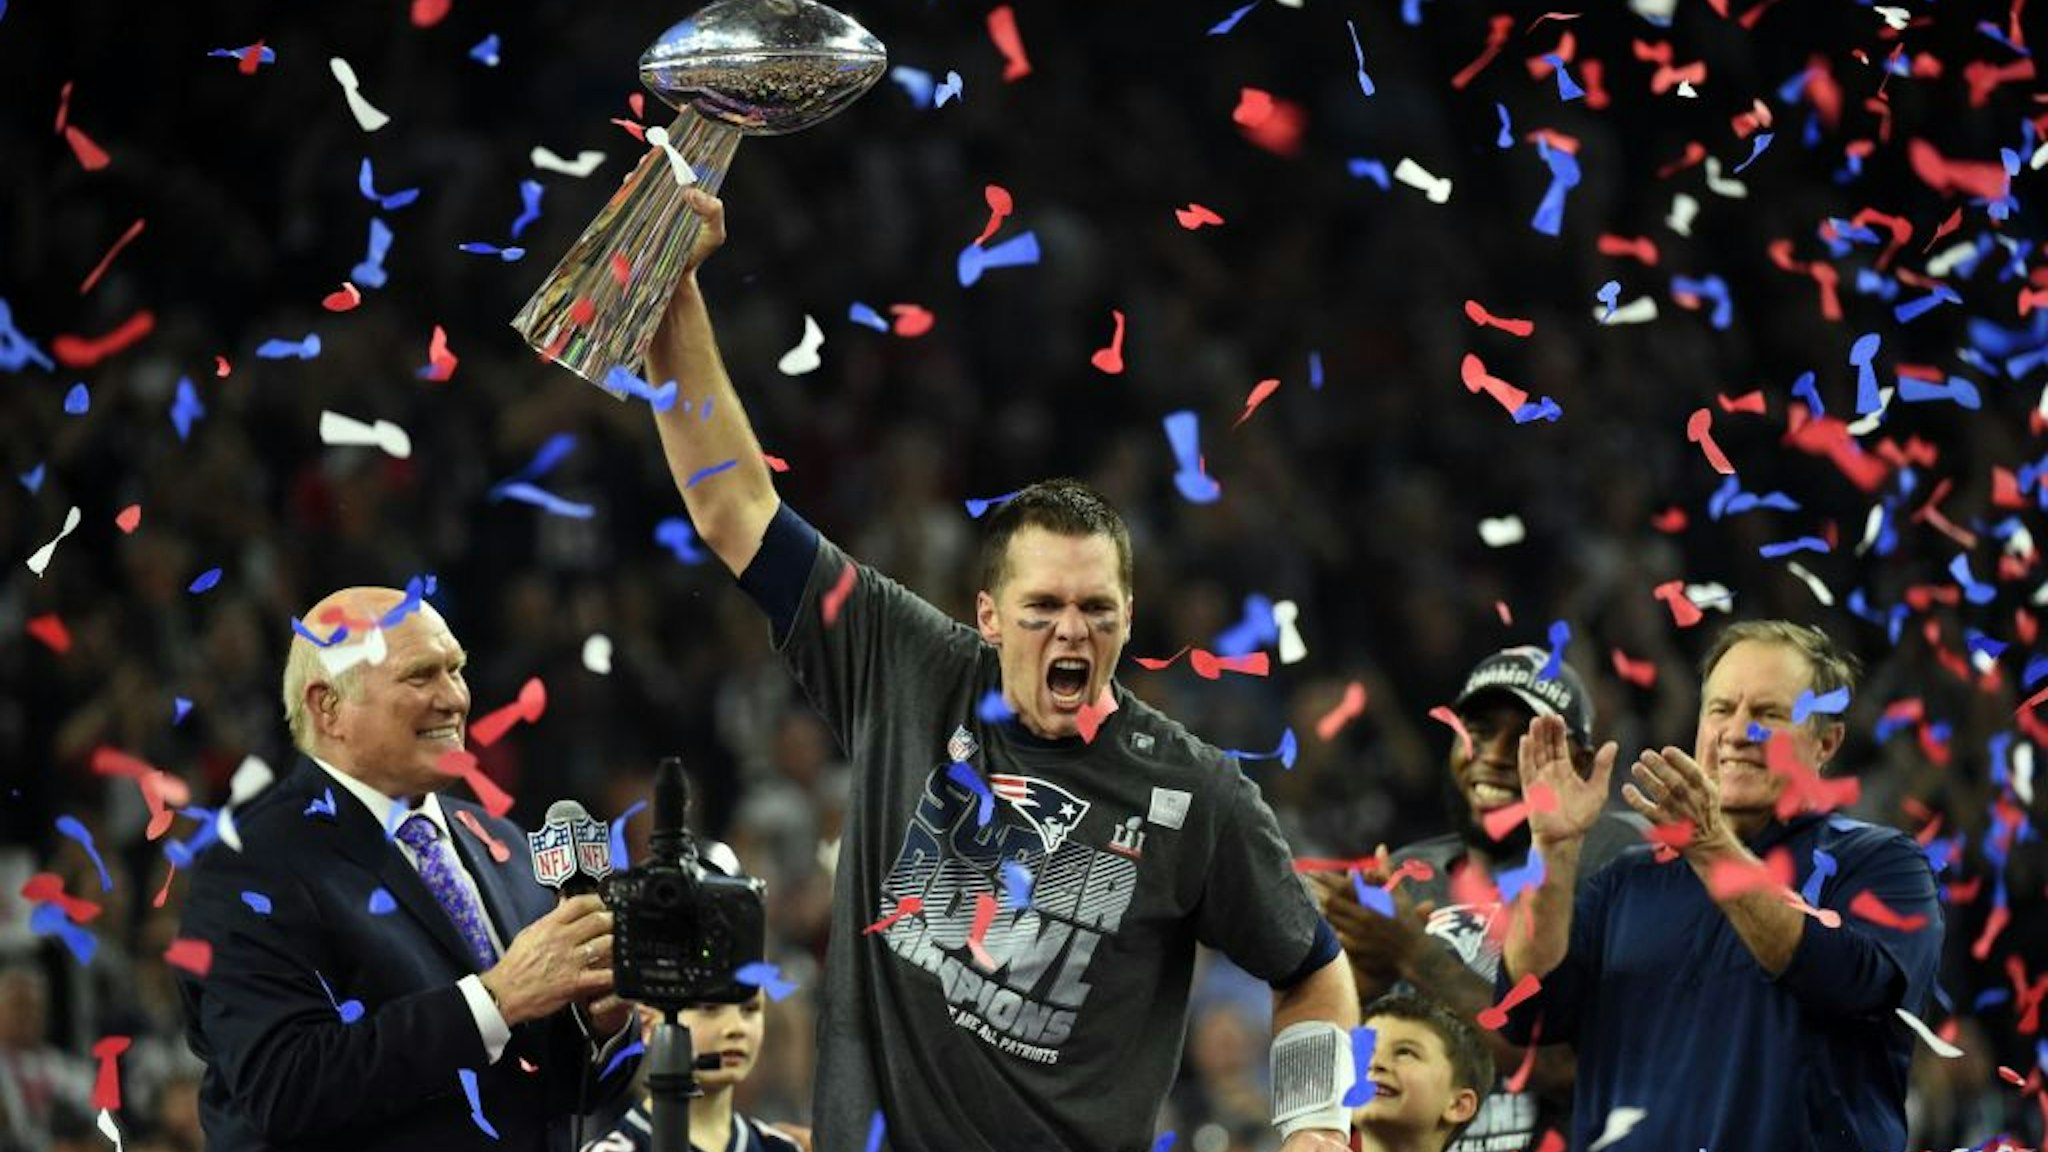 TOPSHOT - Tom Brady #12 of the New England Patriots holds the Vince Lombardi Trophy as Head coach Bill Belichick (R) looks on after defeating the Atlanta Falcons 34-28 in overtime during Super Bowl 51 at NRG Stadium on February 5, 2017 in Houston, Texas. The Patriots defeated the Falcons 34-28 after overtime. / AFP PHOTO / Timothy A. CLARY (Photo credit should read TIMOTHY A. CLARY/AFP via Getty Images)